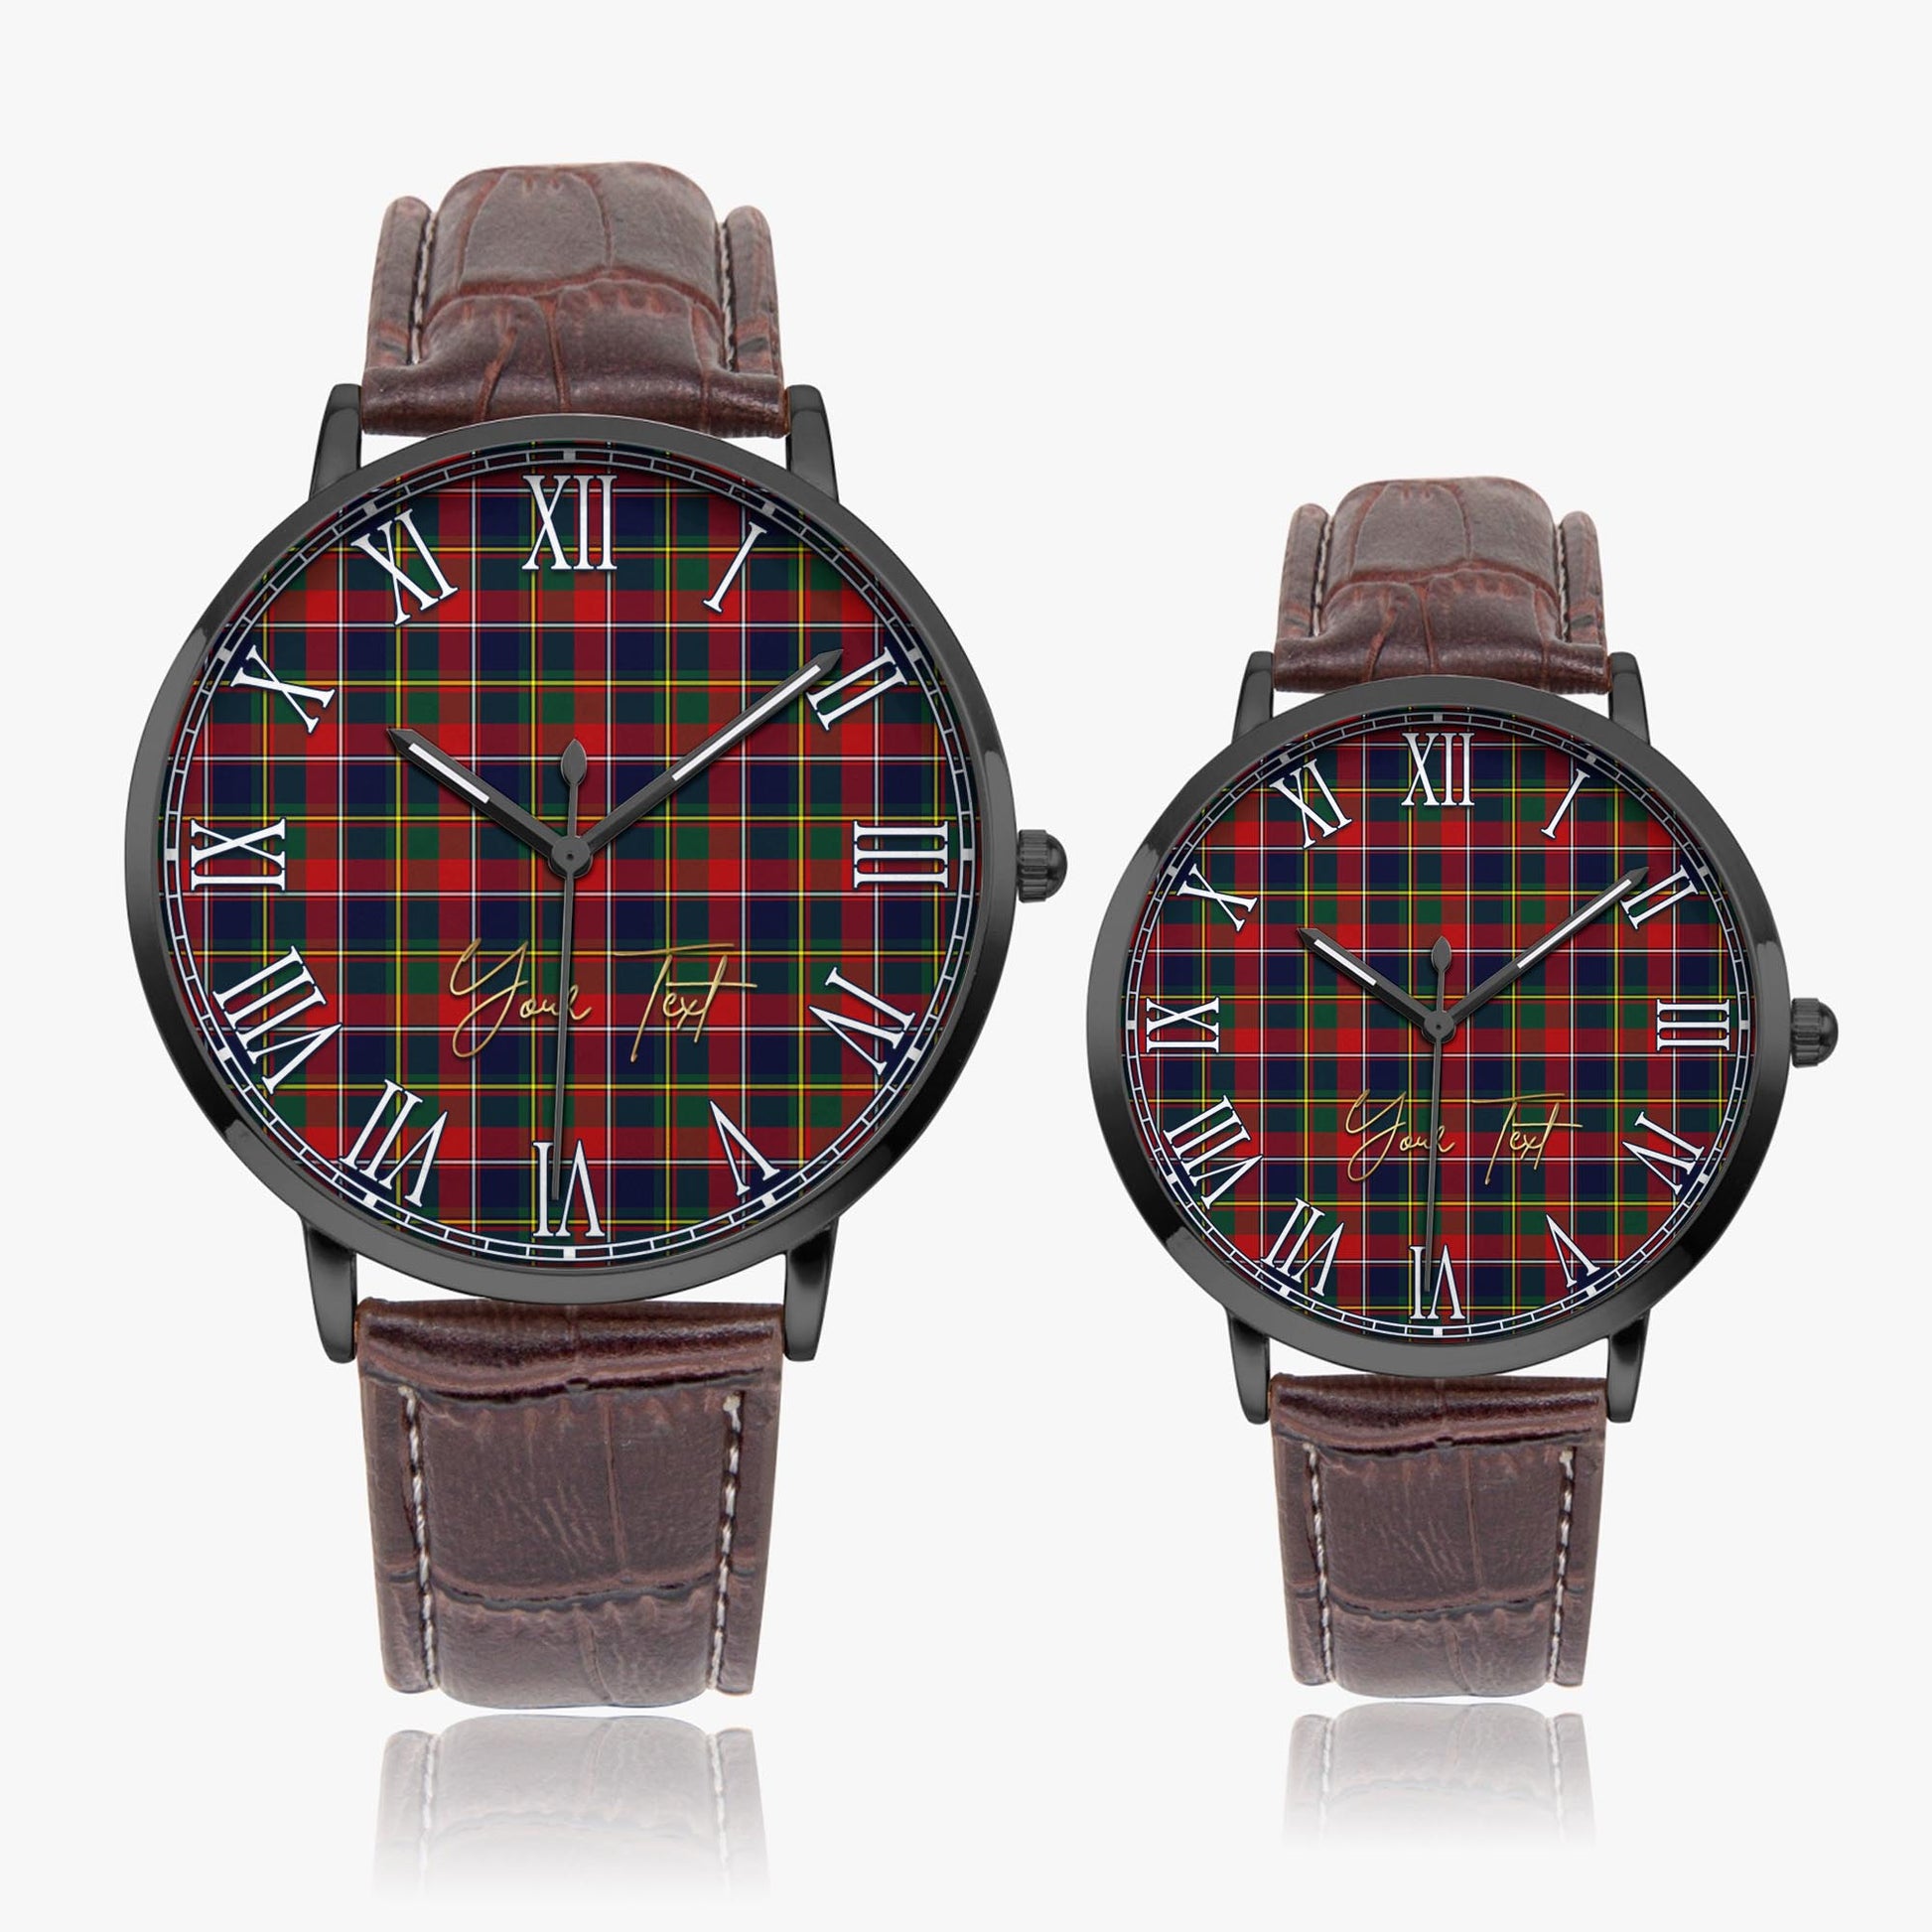 Quebec Province Canada Tartan Personalized Your Text Leather Trap Quartz Watch Ultra Thin Black Case With Brown Leather Strap - Tartanvibesclothing